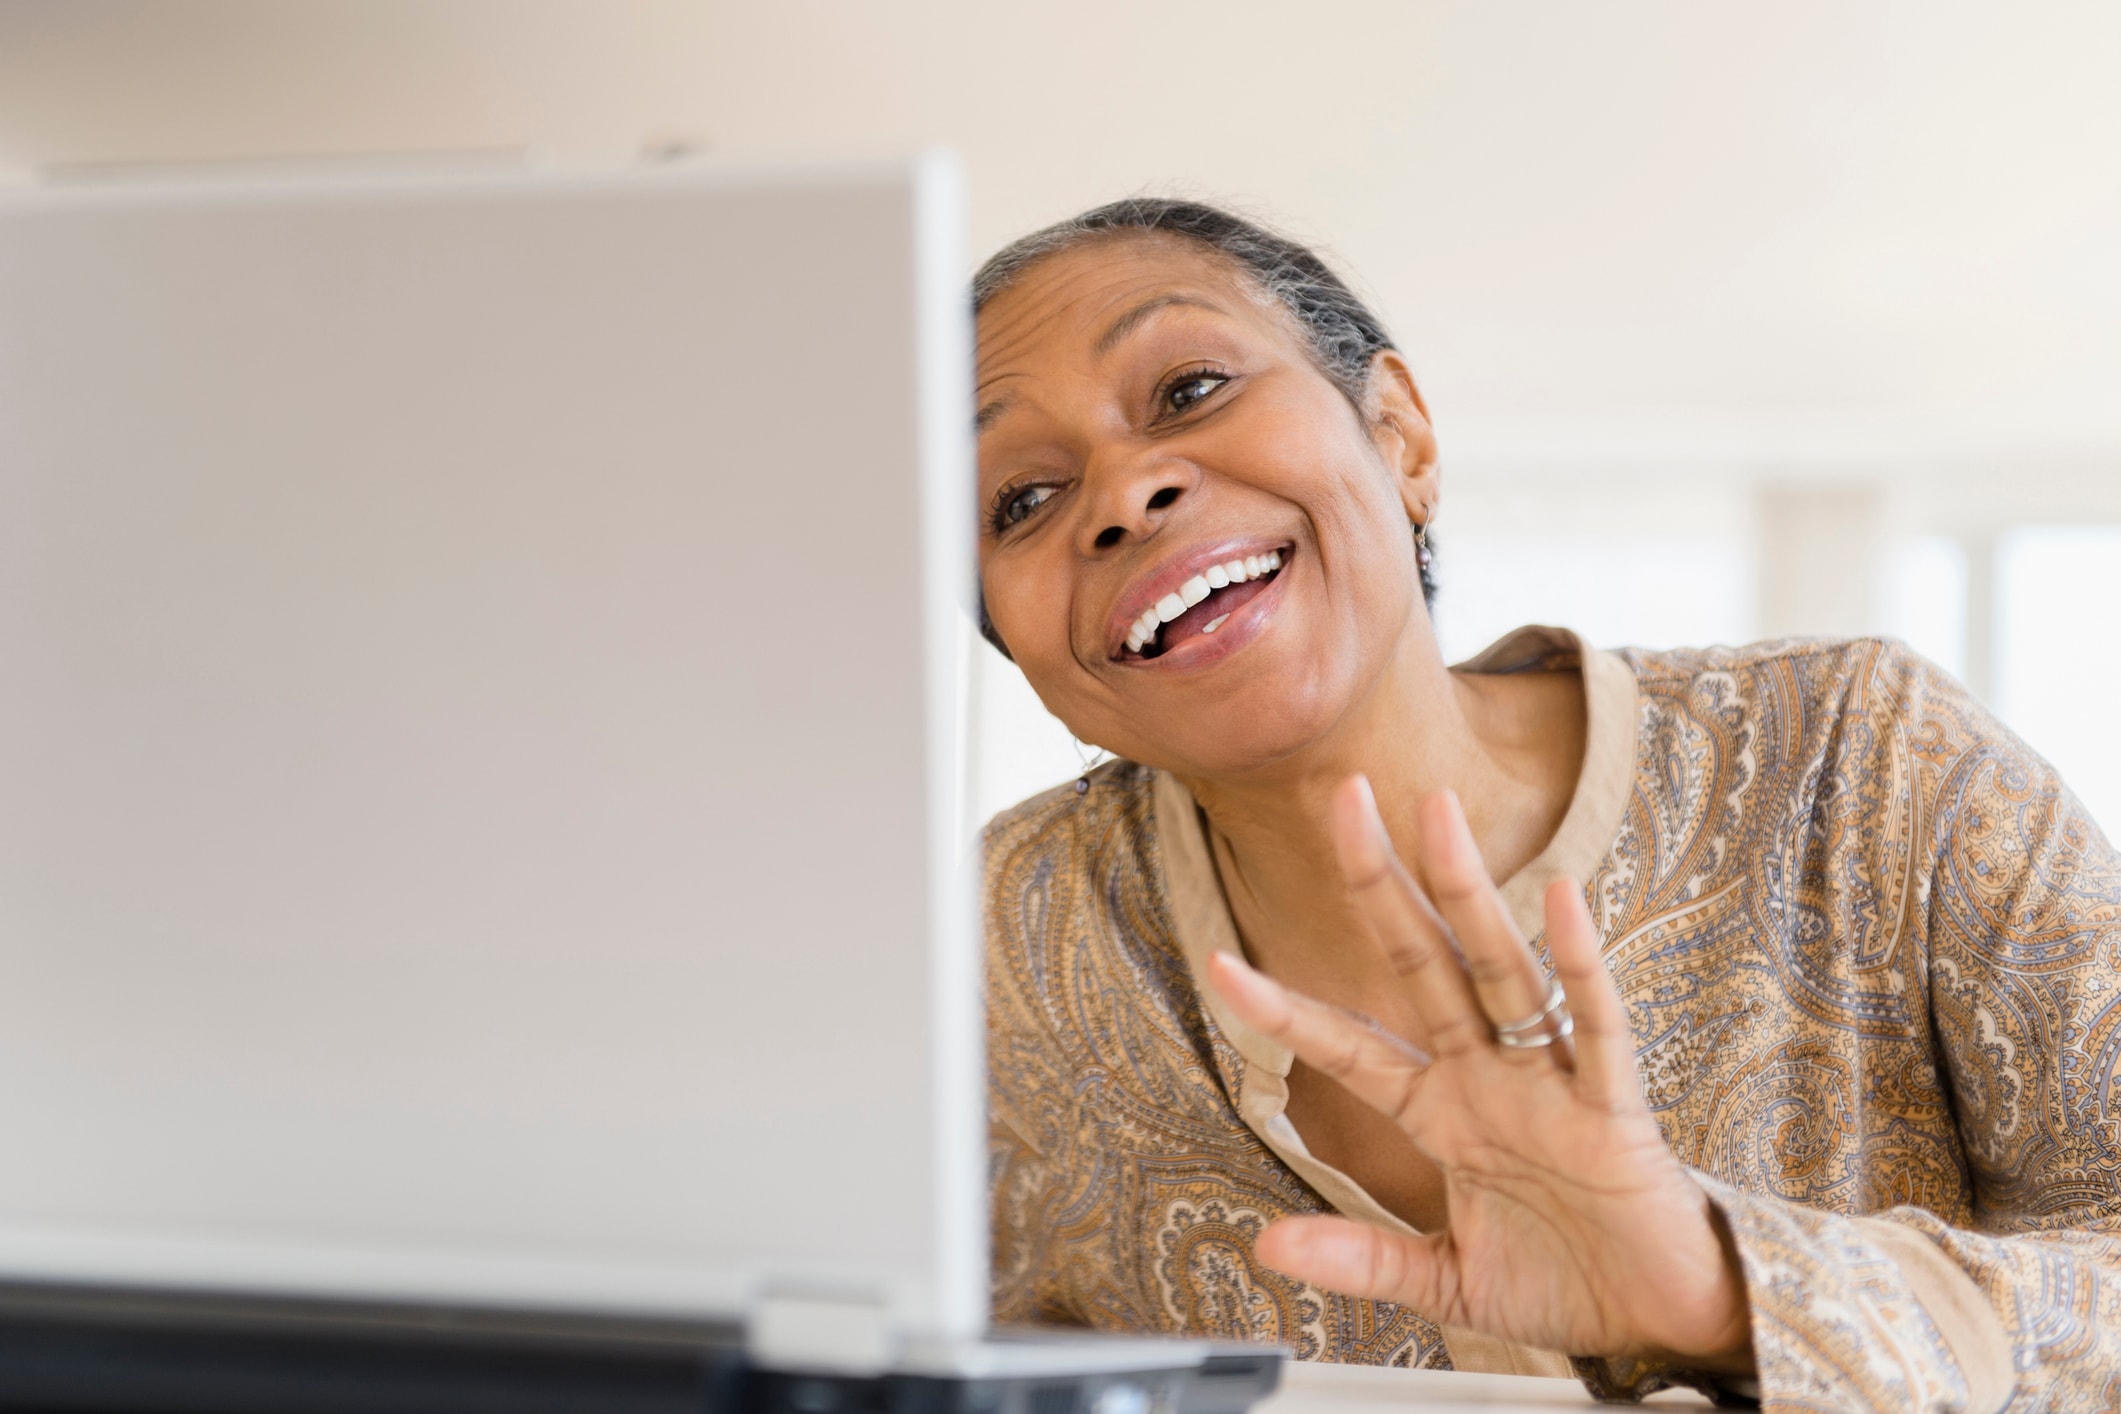 Online dating for seniors: 7 safety tips older adults and caregivers need to know